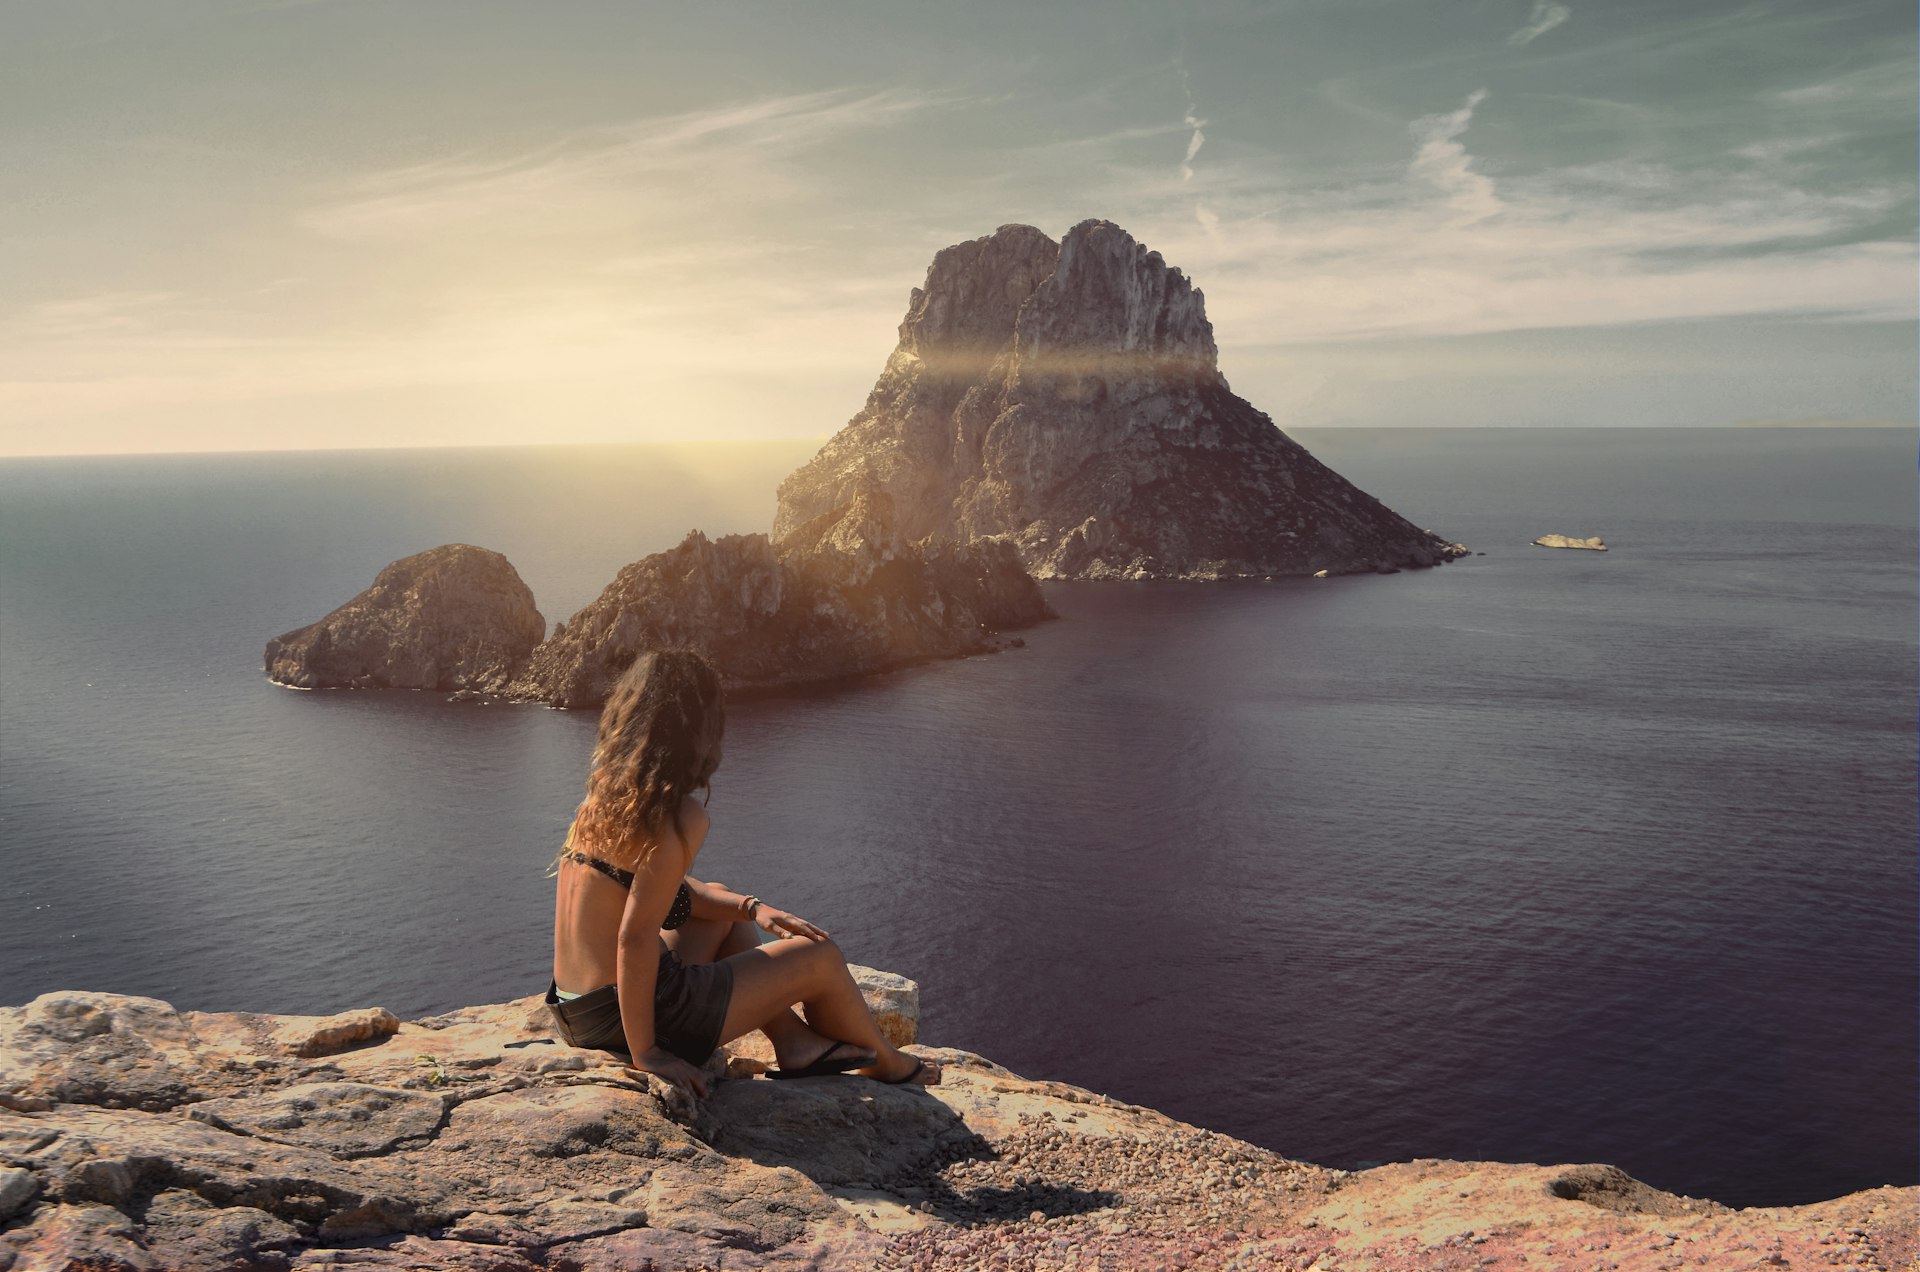 A woman looks at the rocky island of Es Vedrà at sunset, Ibiza, Balearic Islands, Spain